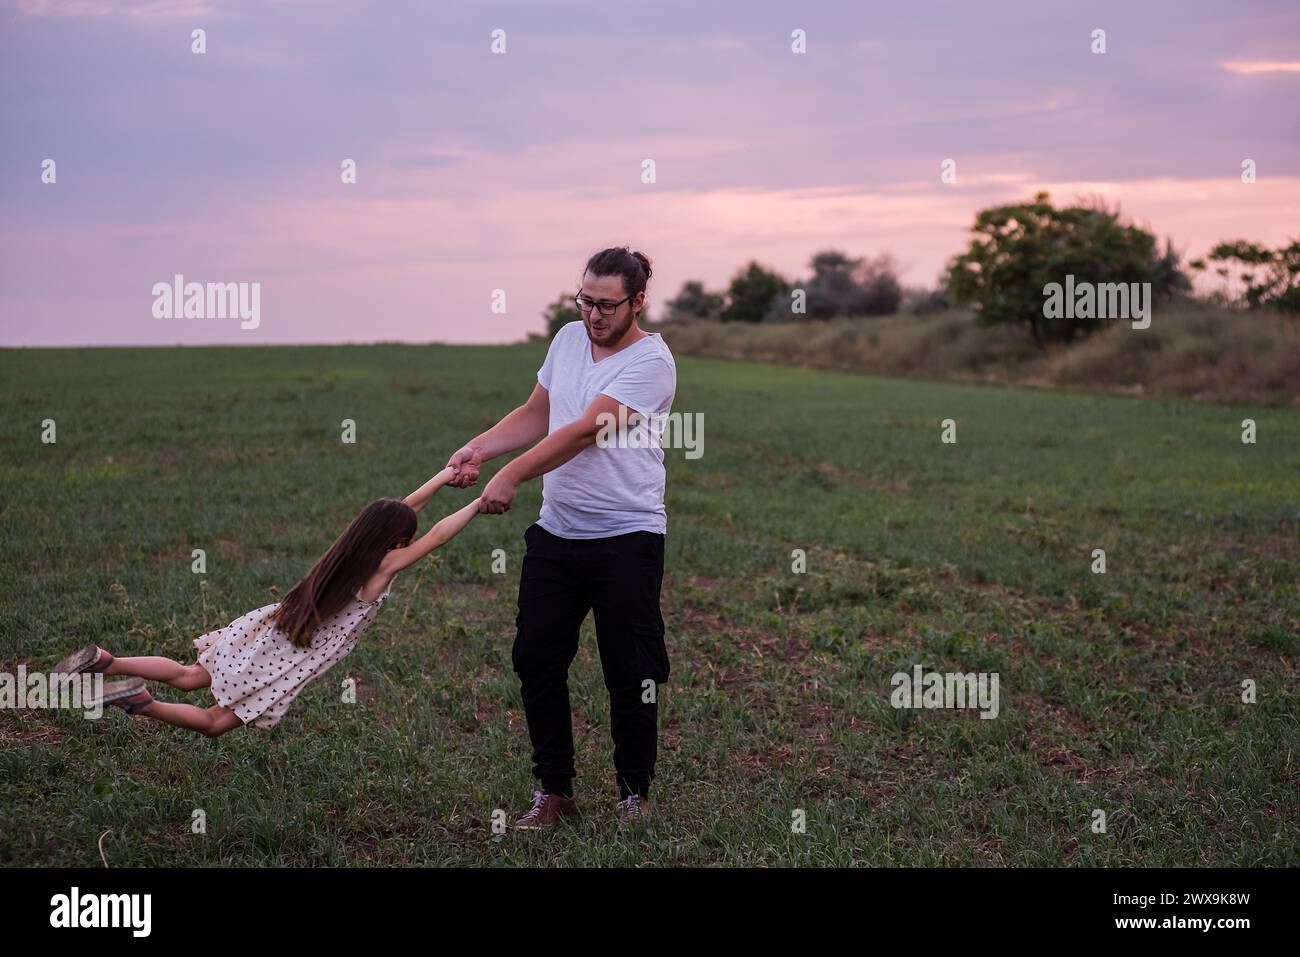 Young man and small girl enjoy playful moment, spinning around in grassy field under pastel sunset sky, conveying warmth, family fun. Joyful Father pl Stock Photo